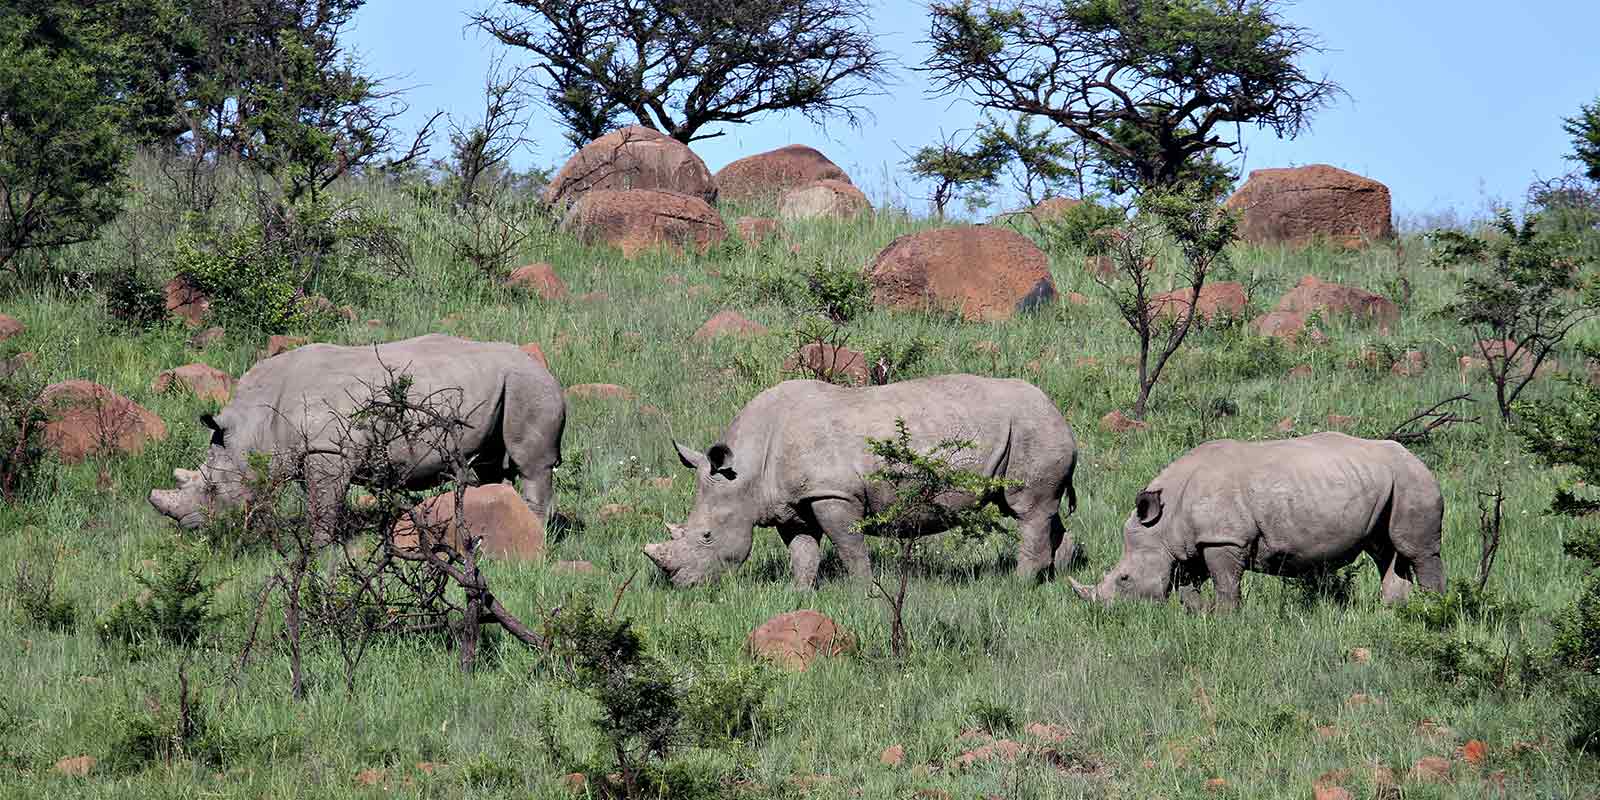 Family of rhino in Hluhluwe-imfolozi Park in South Africa